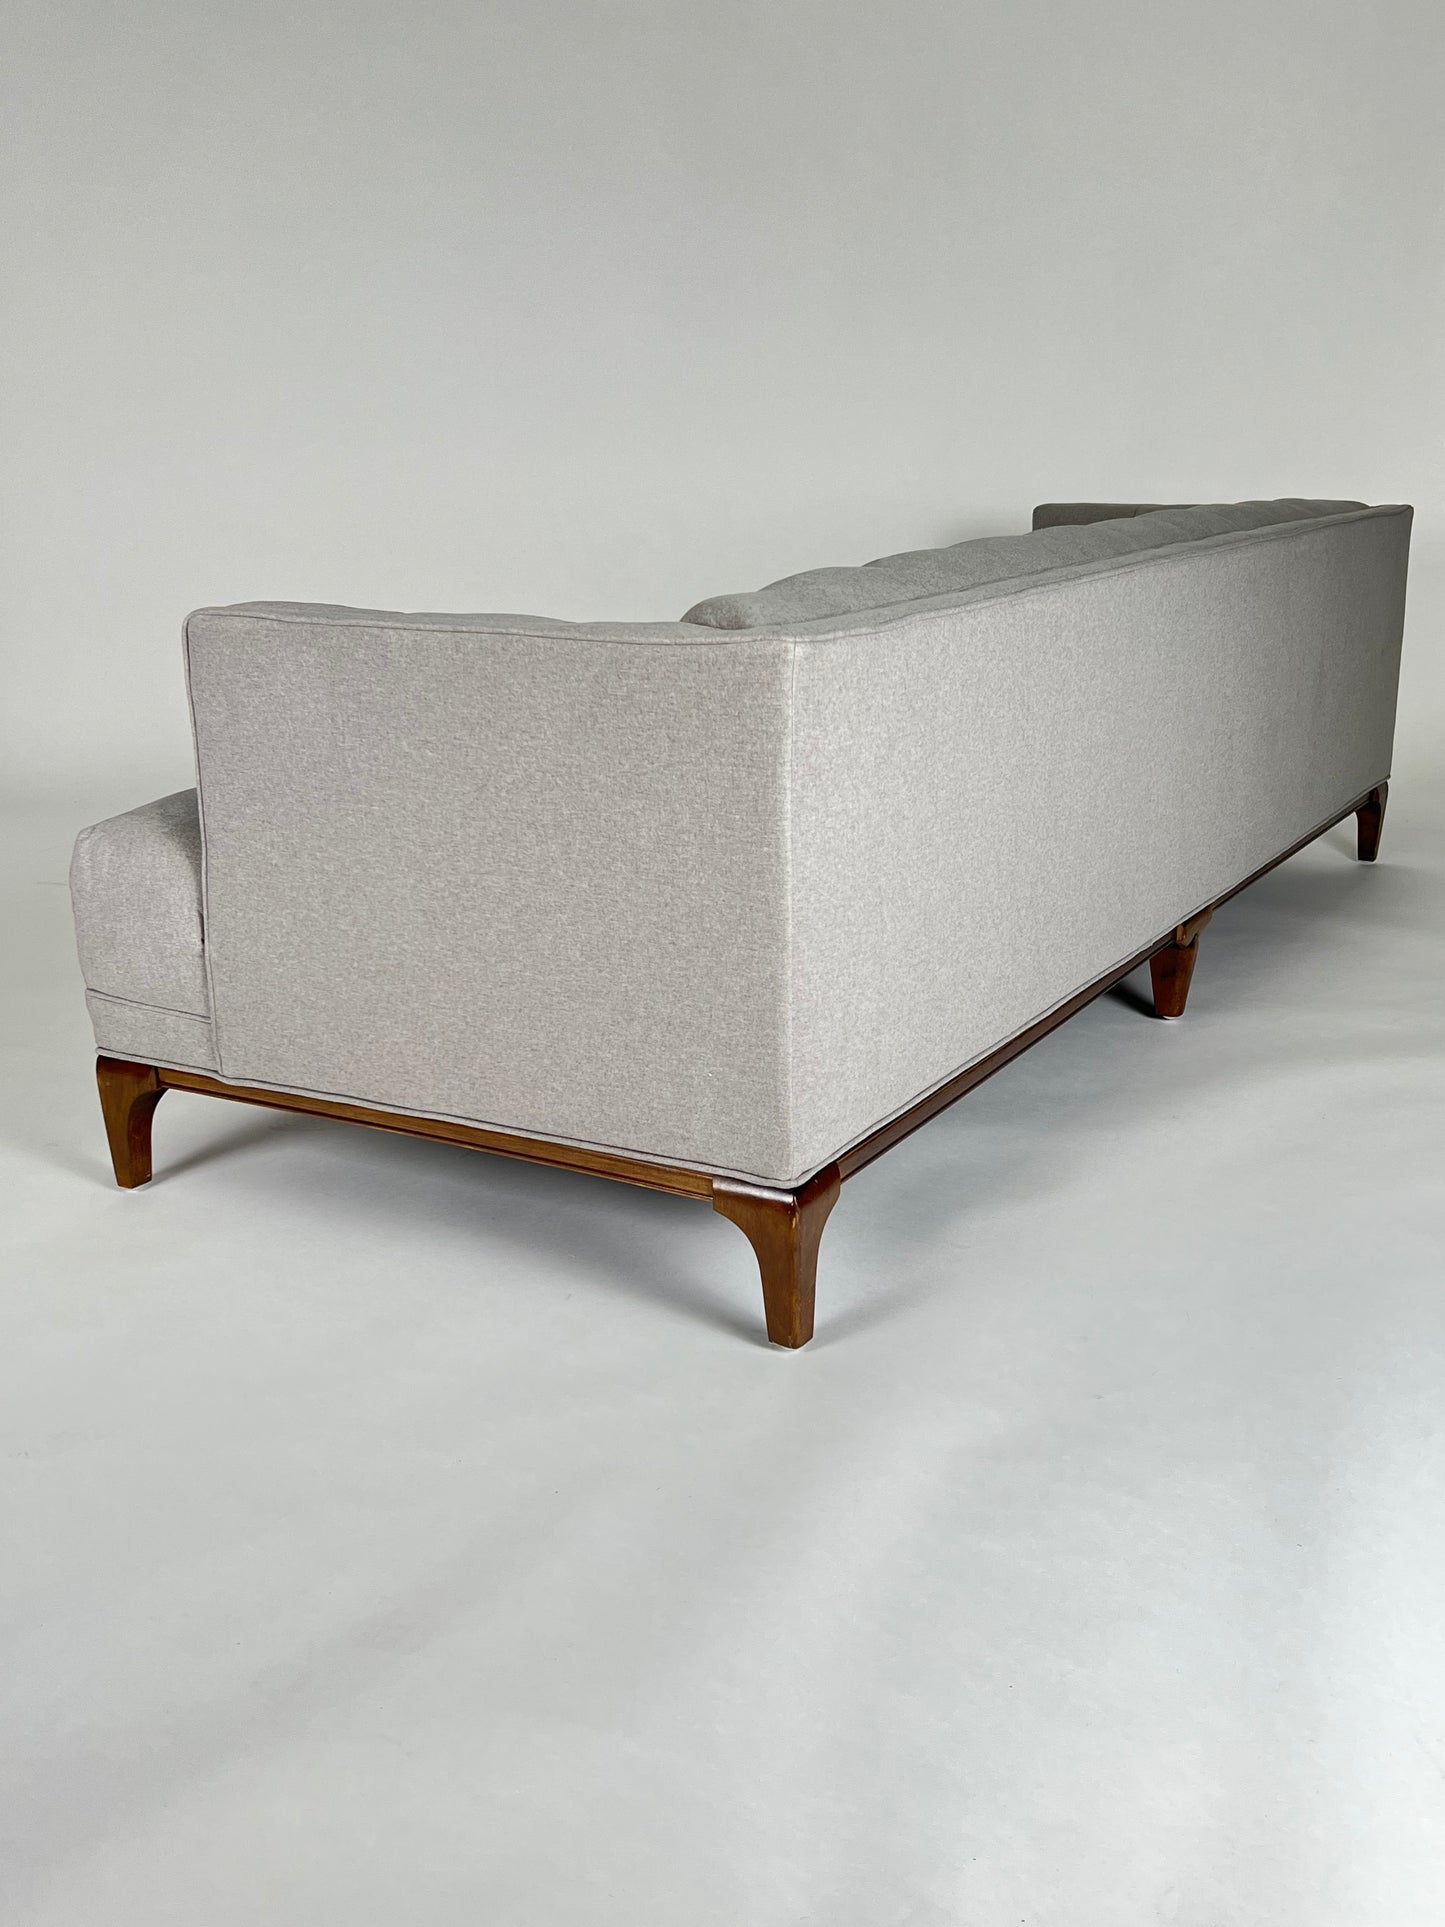 Soft gray sofa, blind tufting, walnut frame and legs, mid-century styling